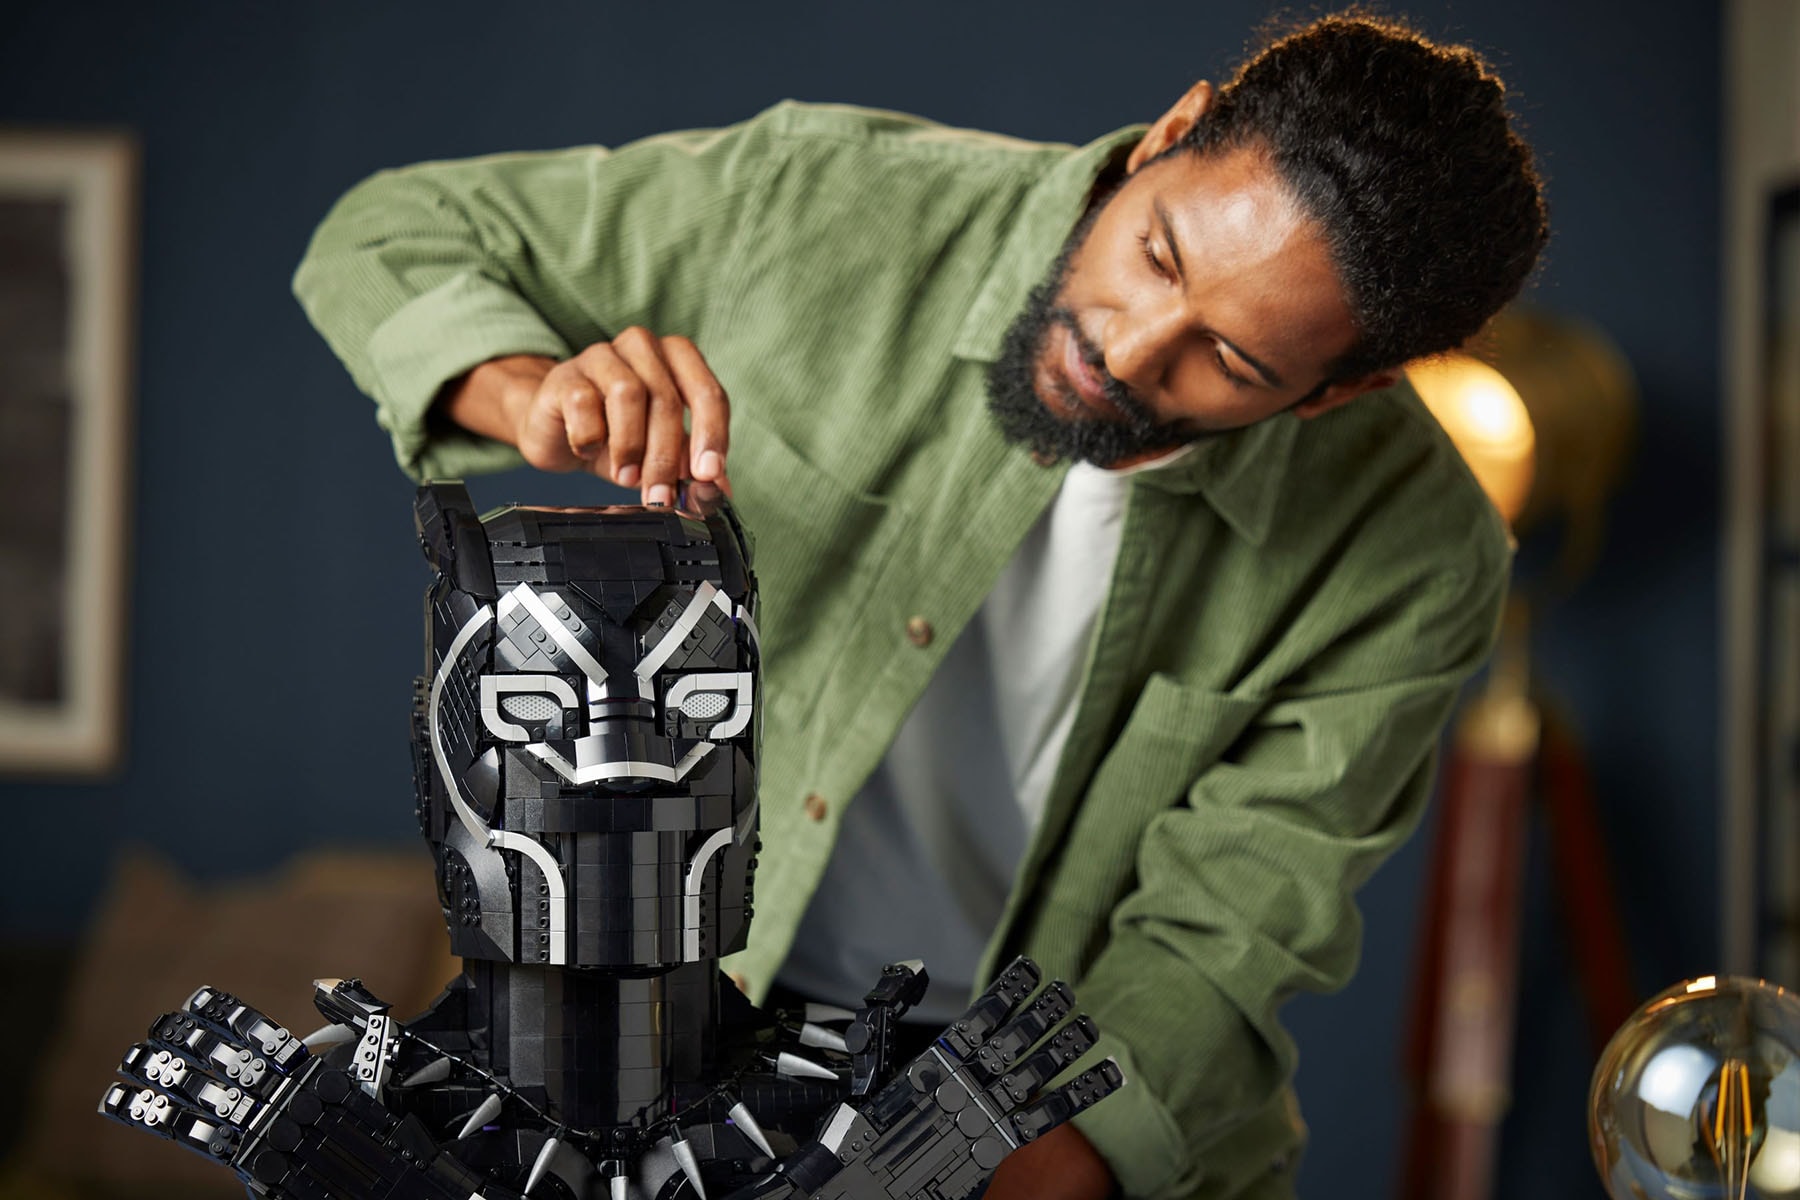 LEGO Black Panther life size scale wakanda forever king t challa release info date price 349 usd necklace gloves